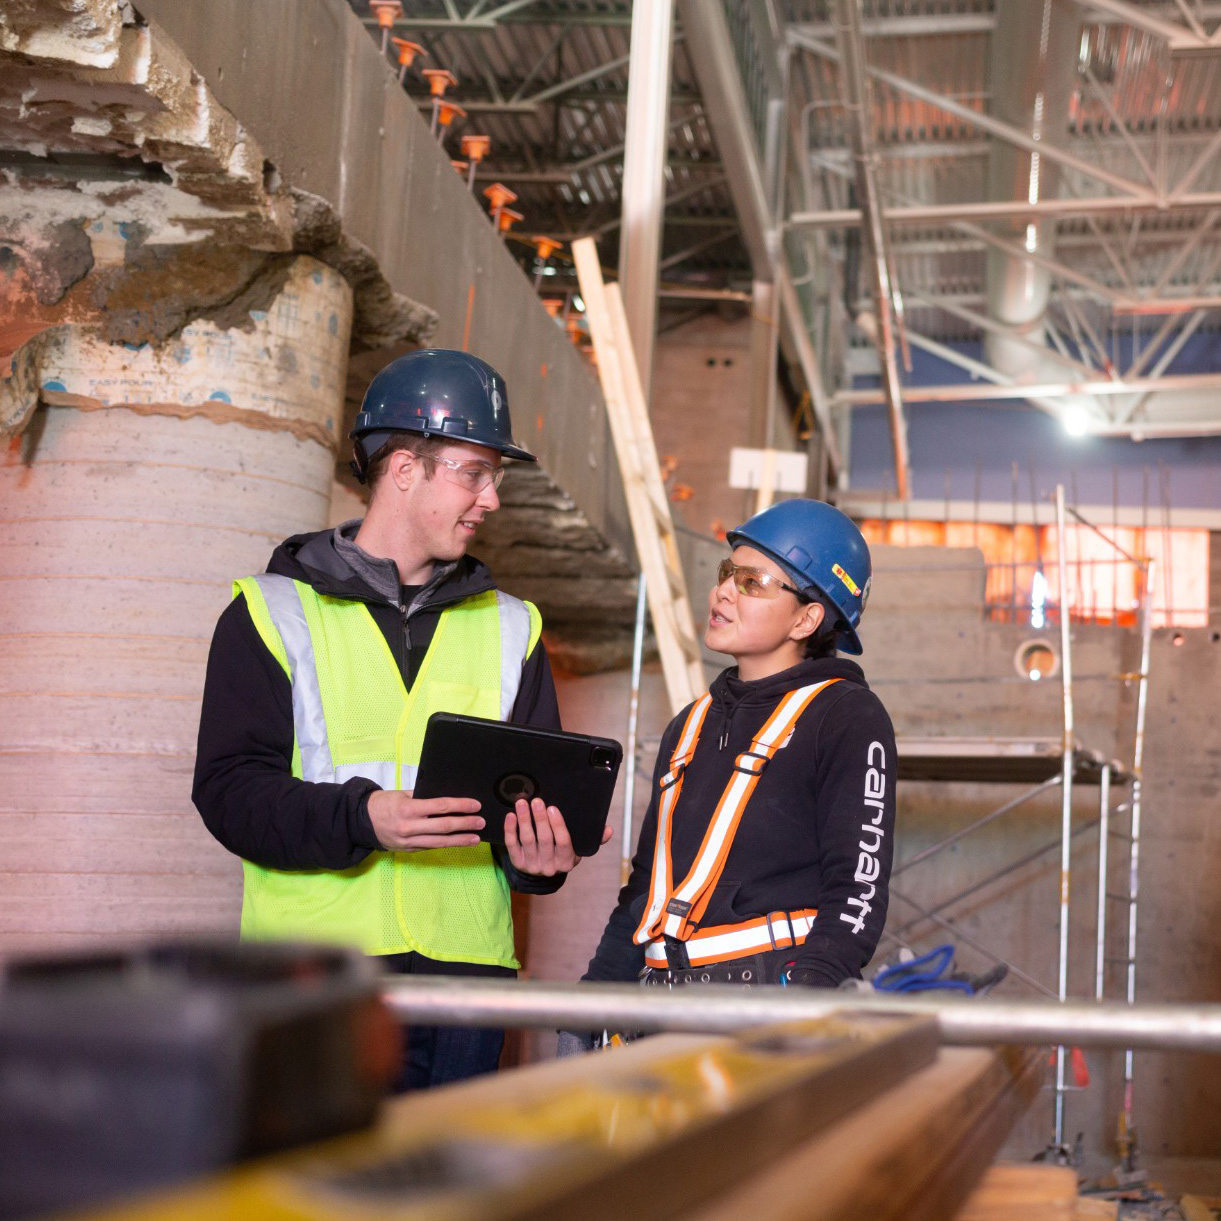 Two Chandos construction workers discussing a project on site.